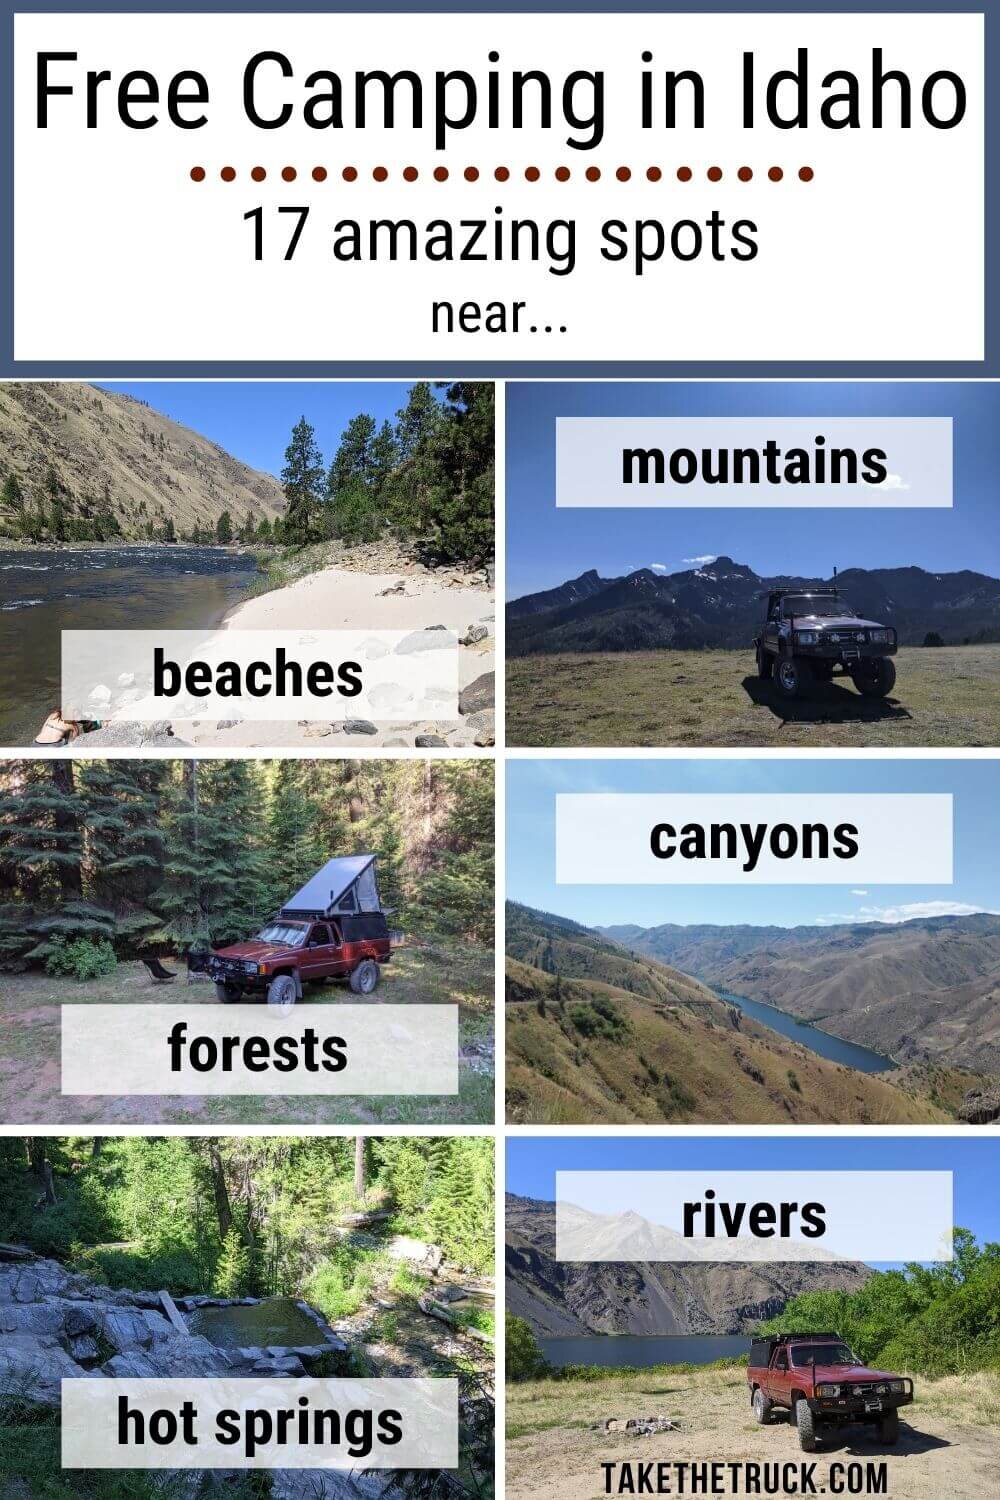 Are you looking for free camping in Idaho? This post gives all the details you’ll need about 17 different boondocking spots - either national forest camping or blm camping in Idaho.